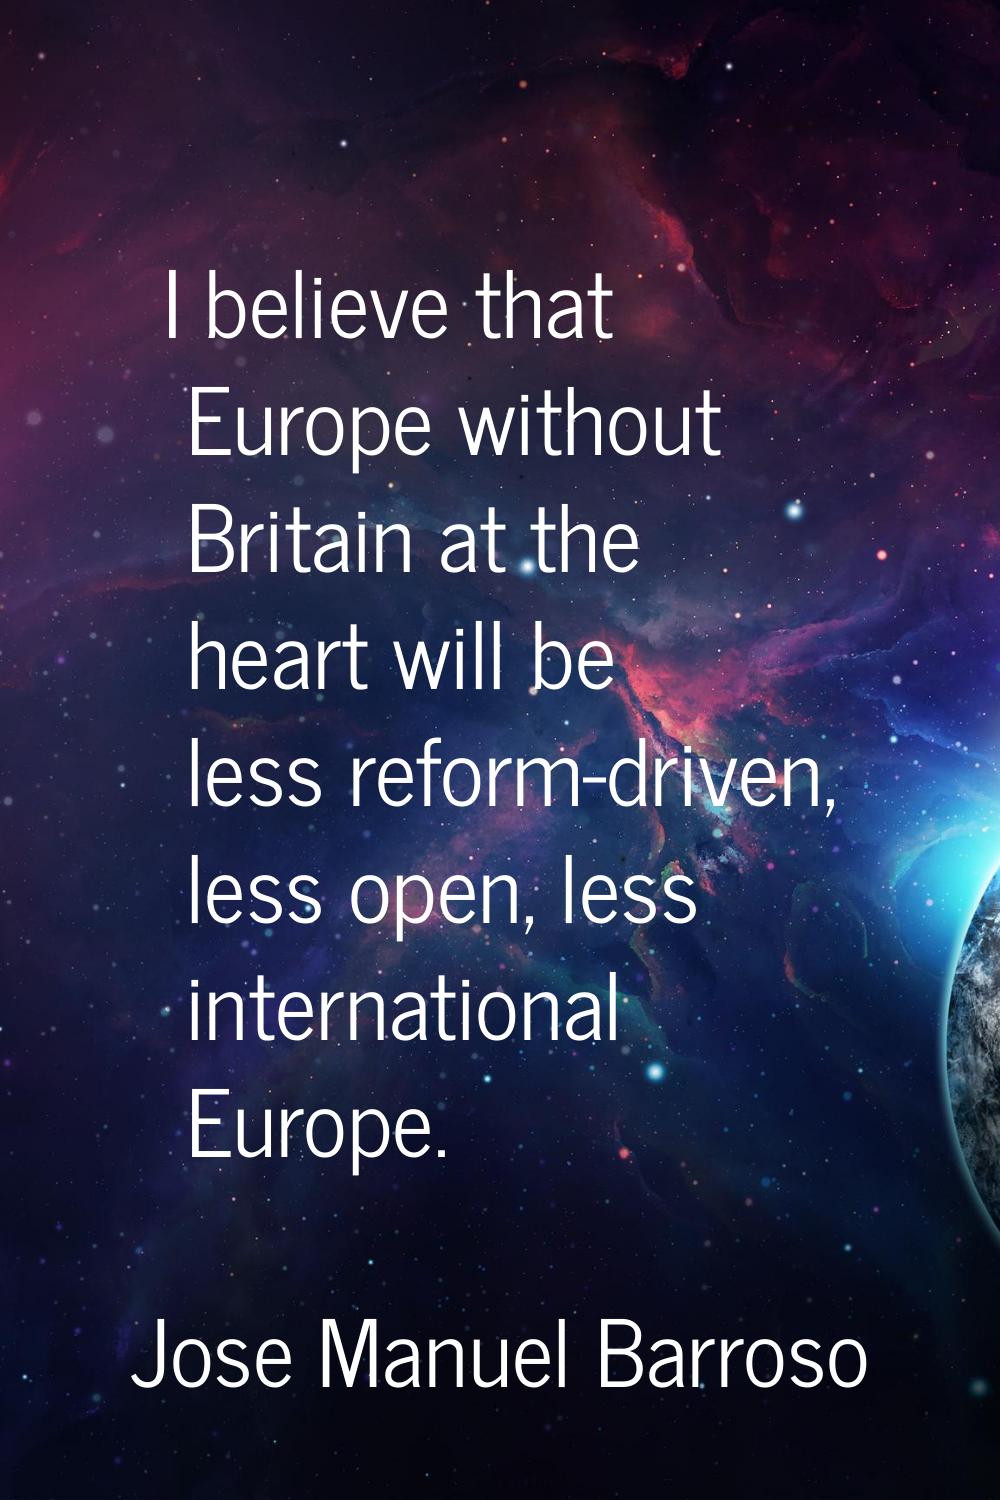 I believe that Europe without Britain at the heart will be less reform-driven, less open, less inte